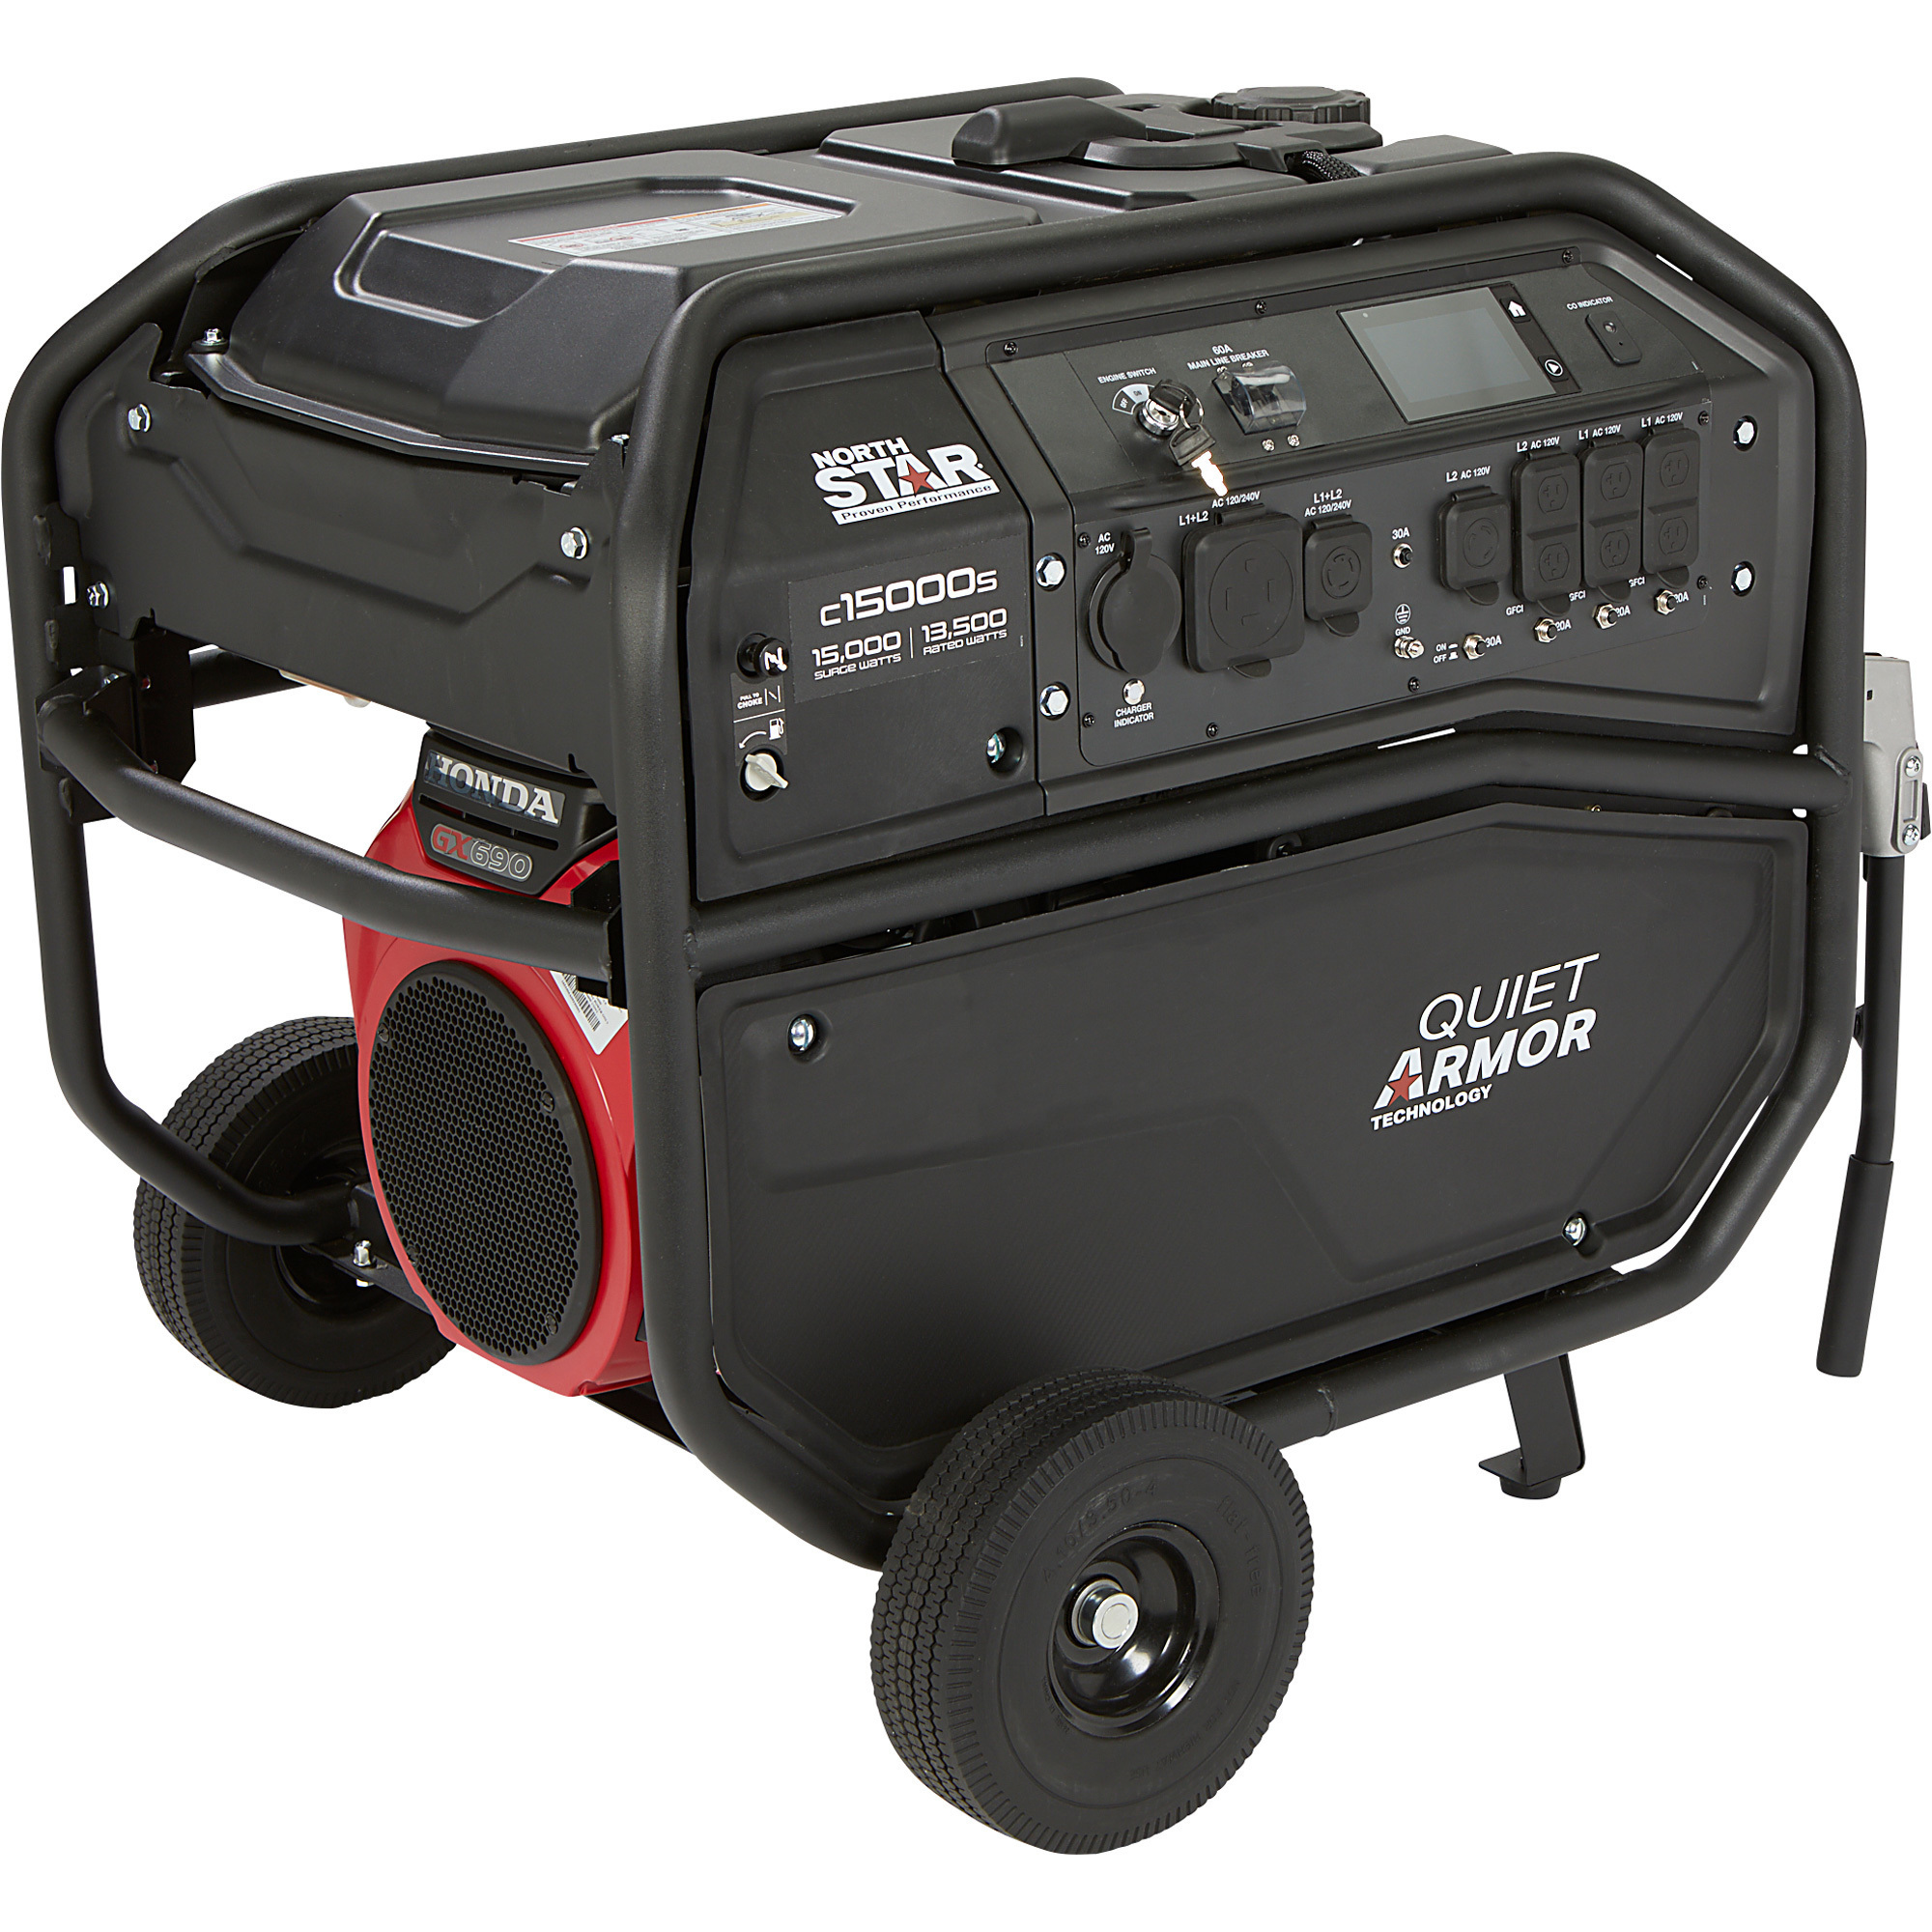 NorthStar c15000s Commercial-Grade Portable Generator with Electric Start, 15,000 Surge Watts, 13,500 Rated Watts, Model 1654406